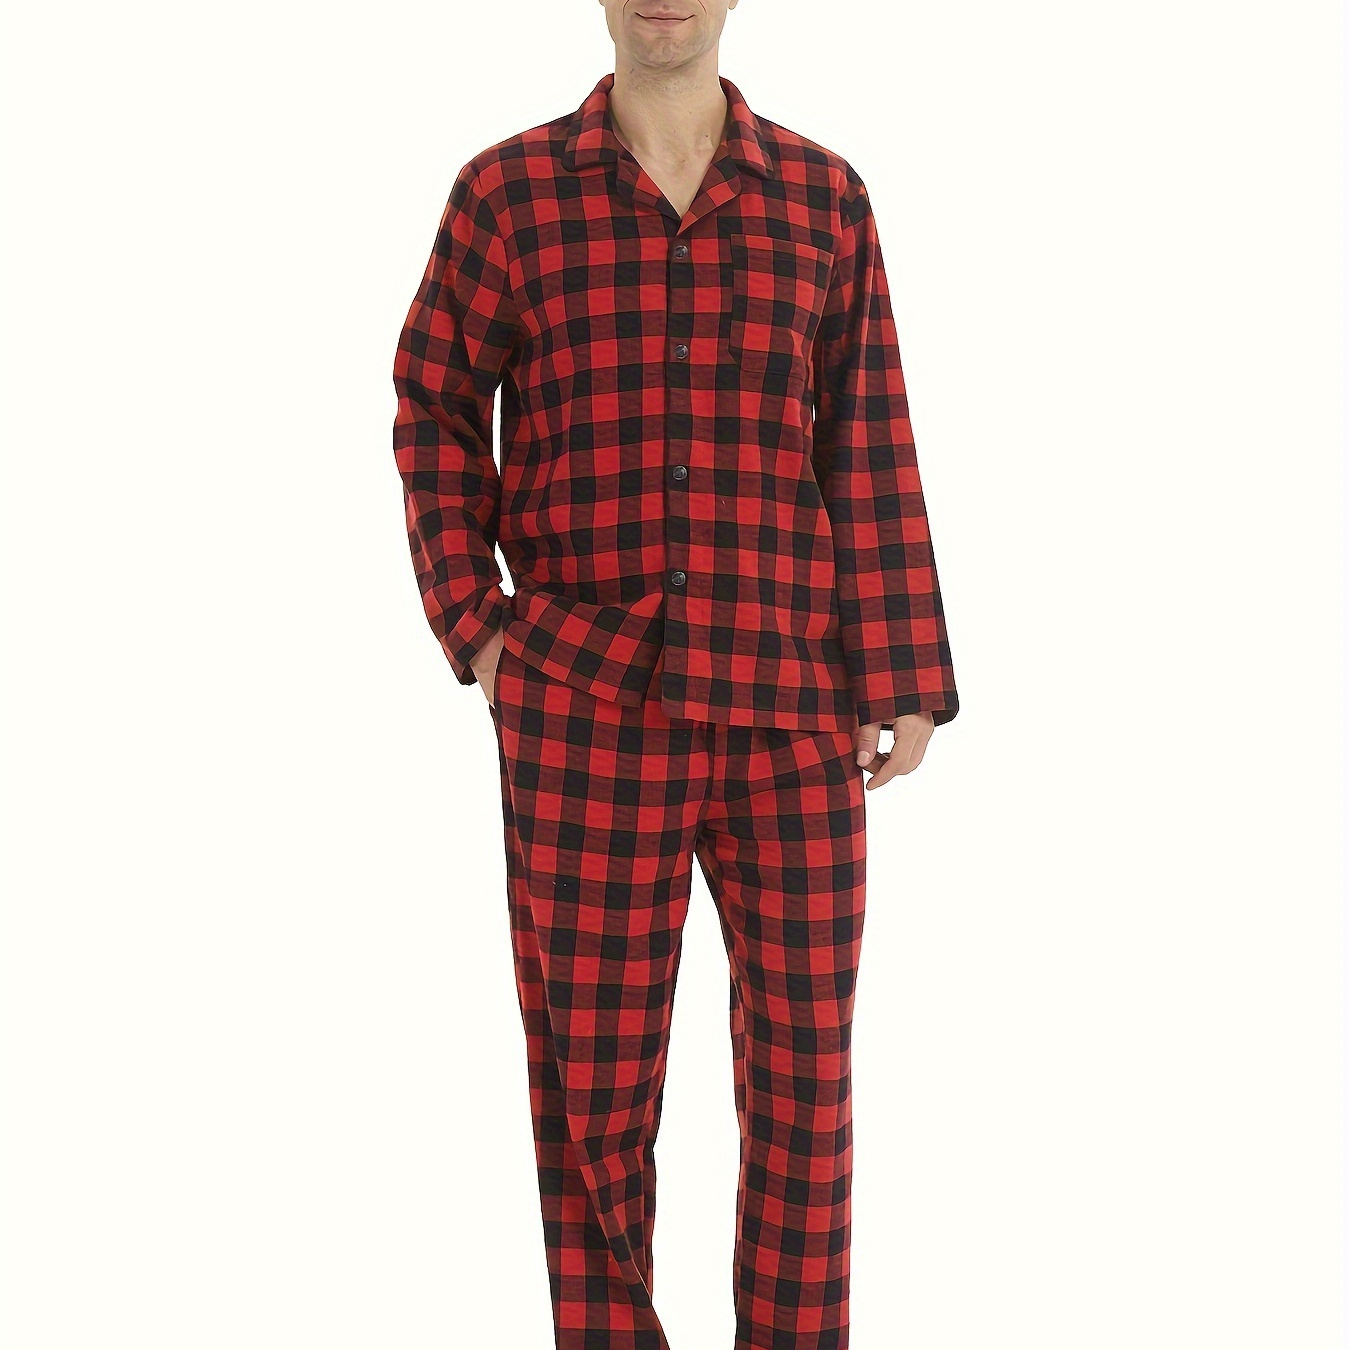 

Men’s Simple Style Casual Pajamas Sets Warm Flannel Lounge Wear, Plaid Long Sleeve Lapel Neck Shirt & Loose Pants Home Pajamas Sets, Outdoor Sets For Autumn And Winter